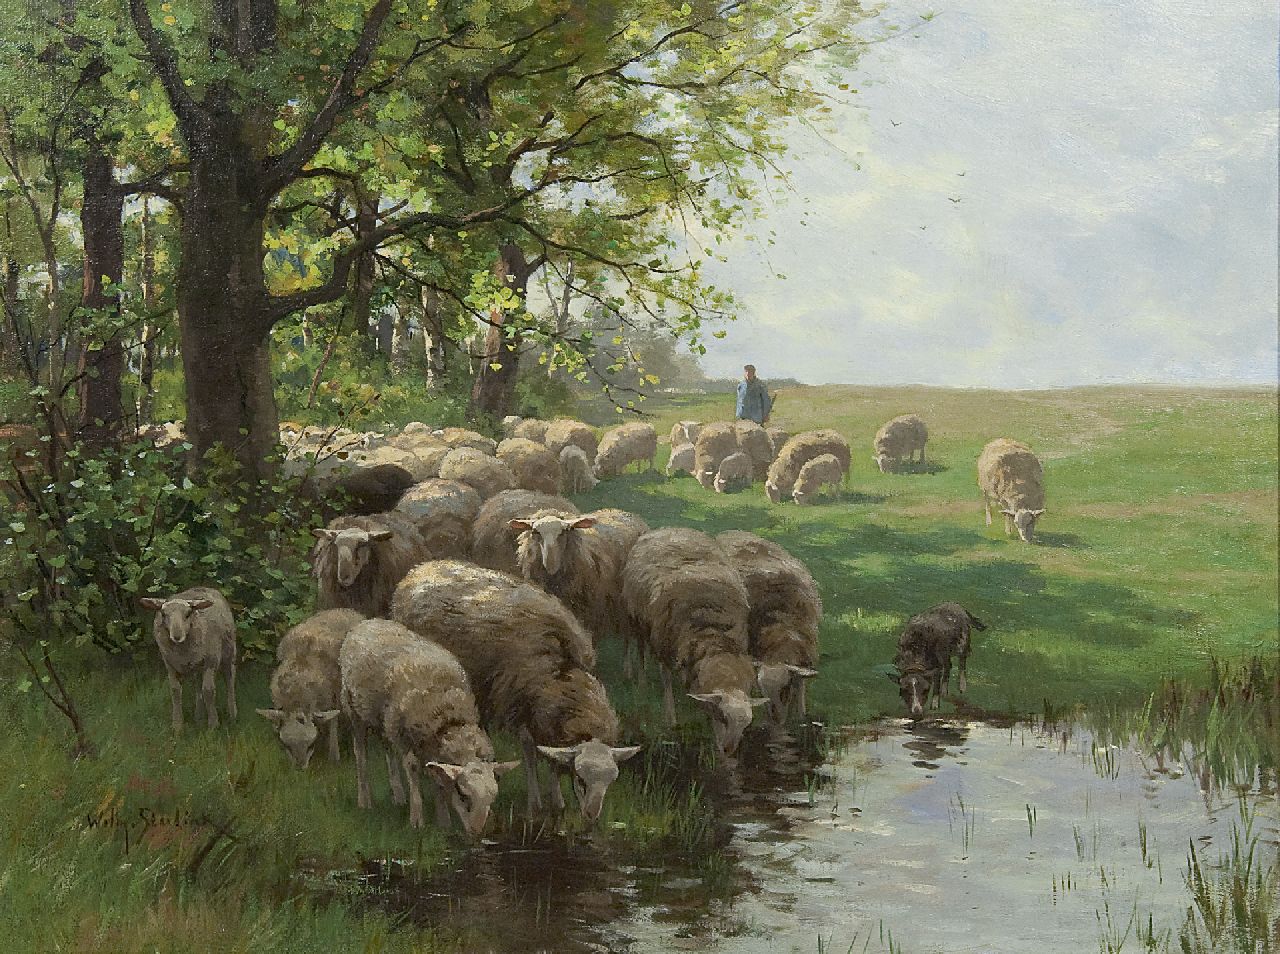 Steelink jr. W.  | Willem Steelink jr., A sheperd with flock by at watering place, oil on canvas 50.5 x 67.5 cm, signed l.l. and dated juli 1914 on the reverse